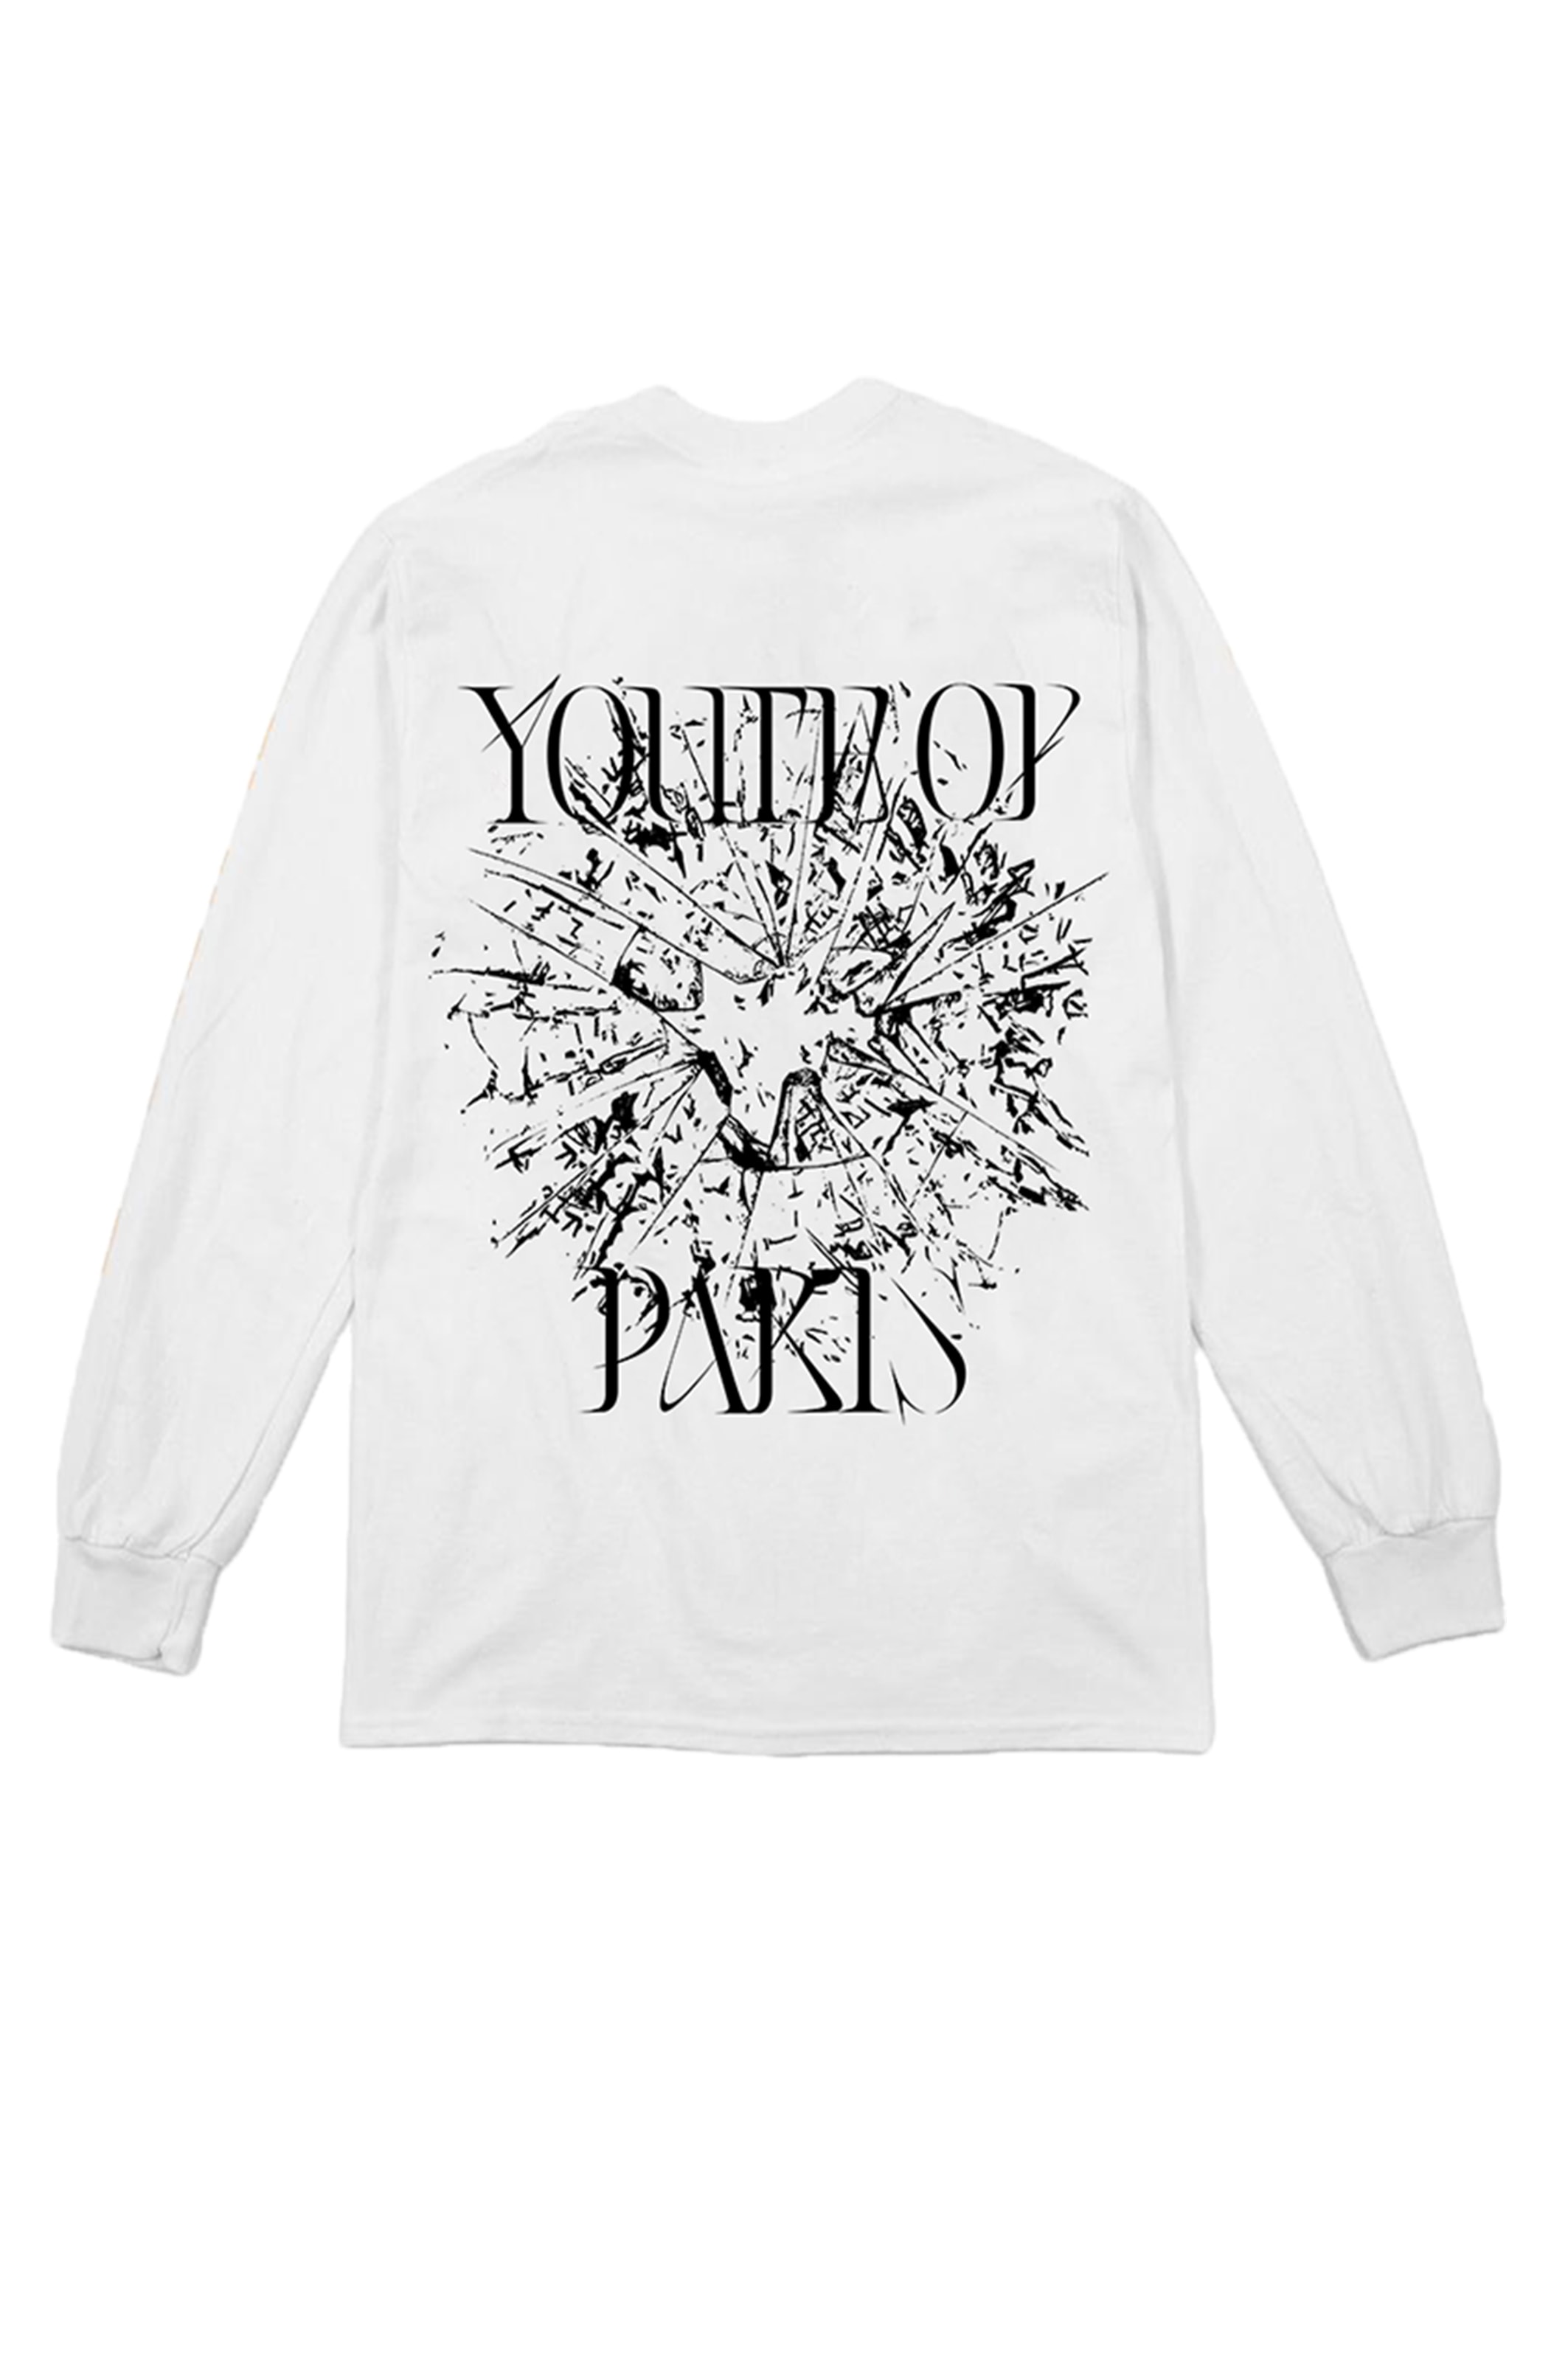 YOUTH OF PARIS